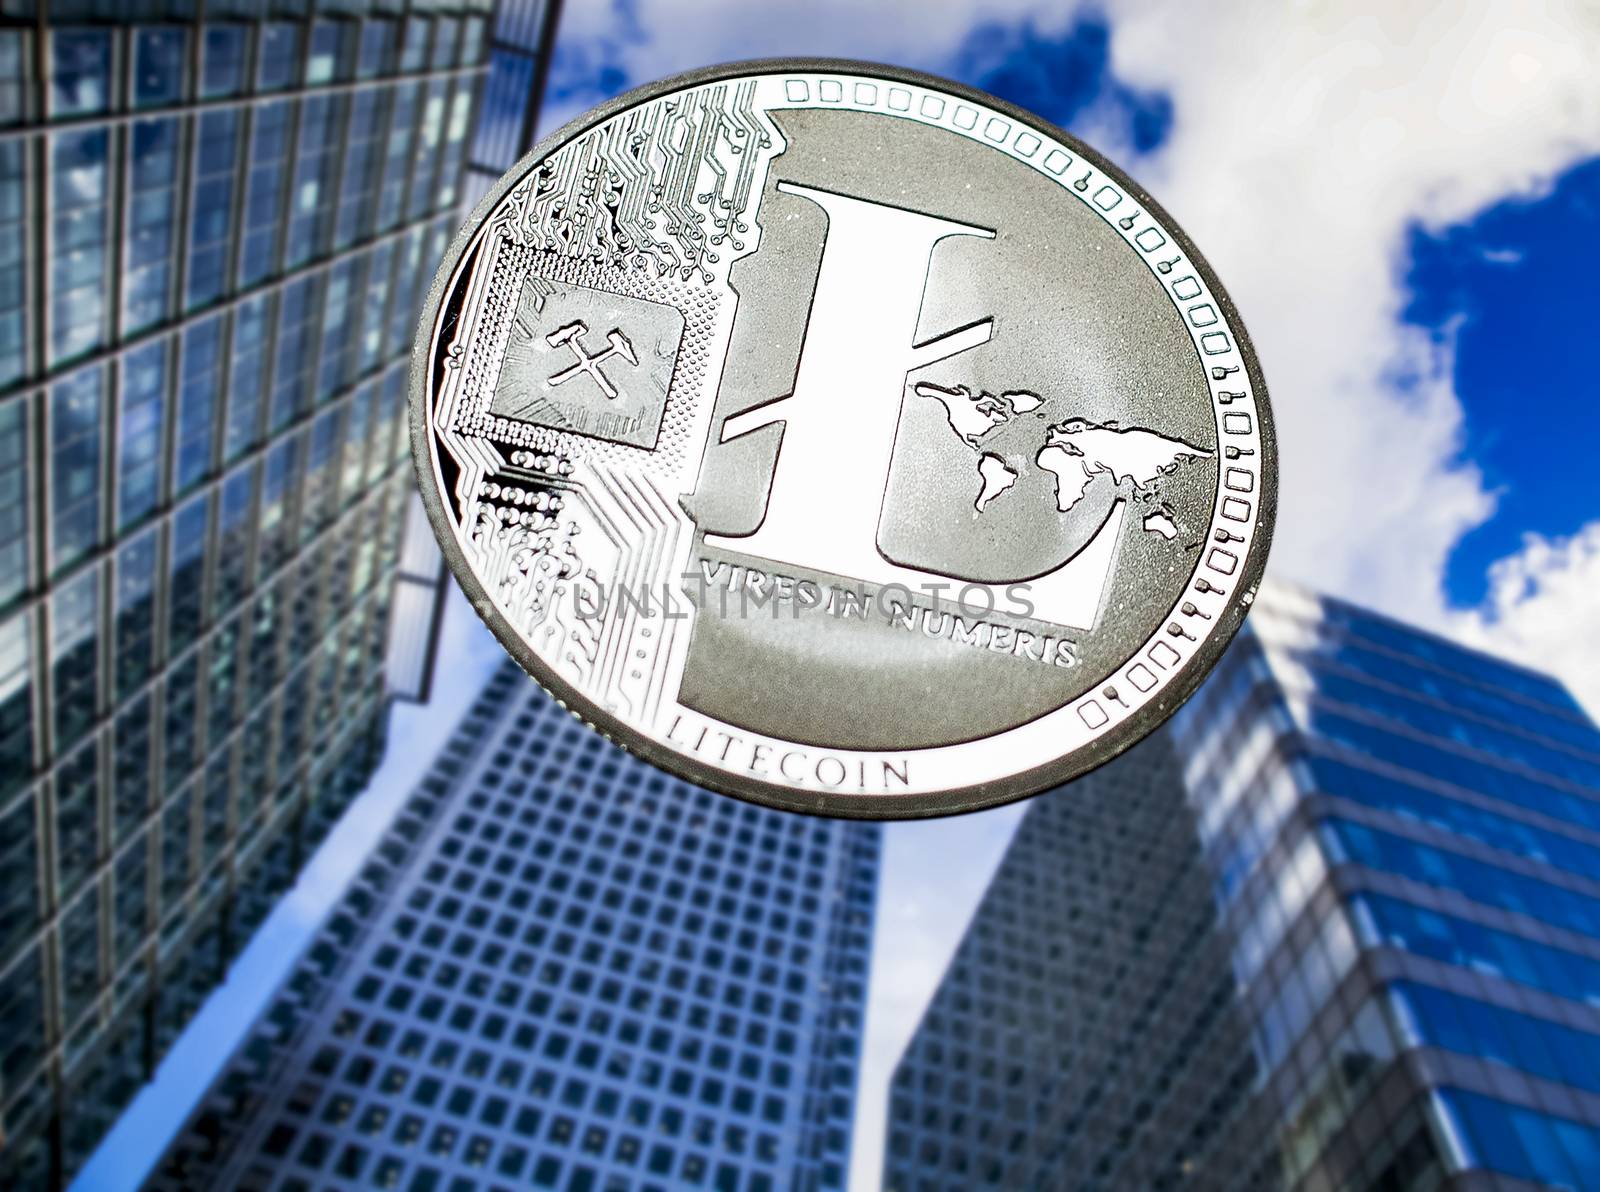 litecoin agains skyscrapers - futuristic smart city - cryptocurr by melis